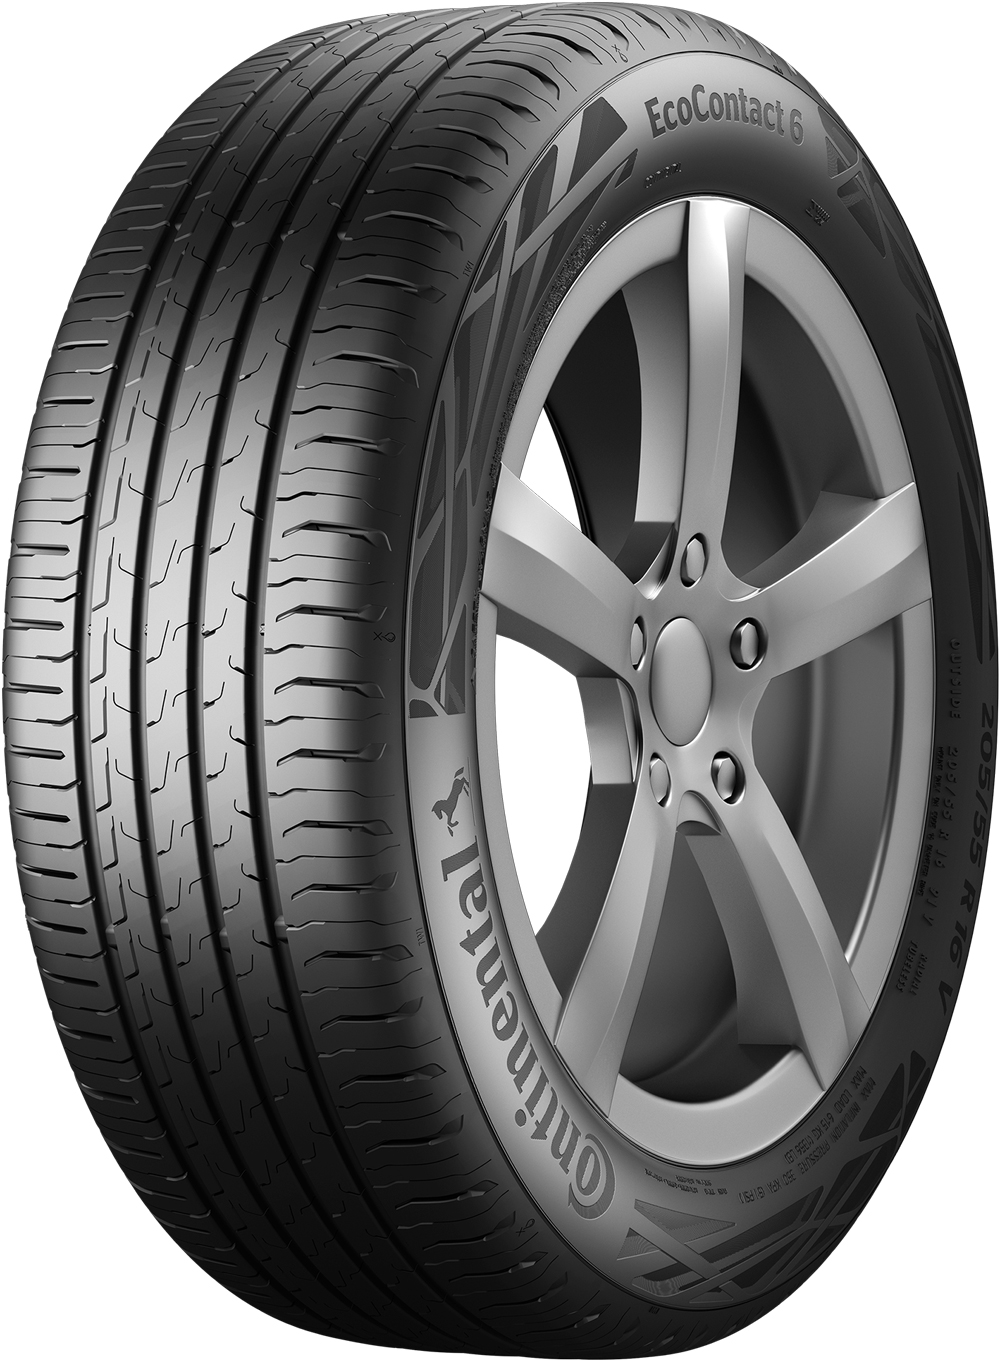 Anvelope auto CONTINENTAL ECO6XLE XL 195/60 R18 96H